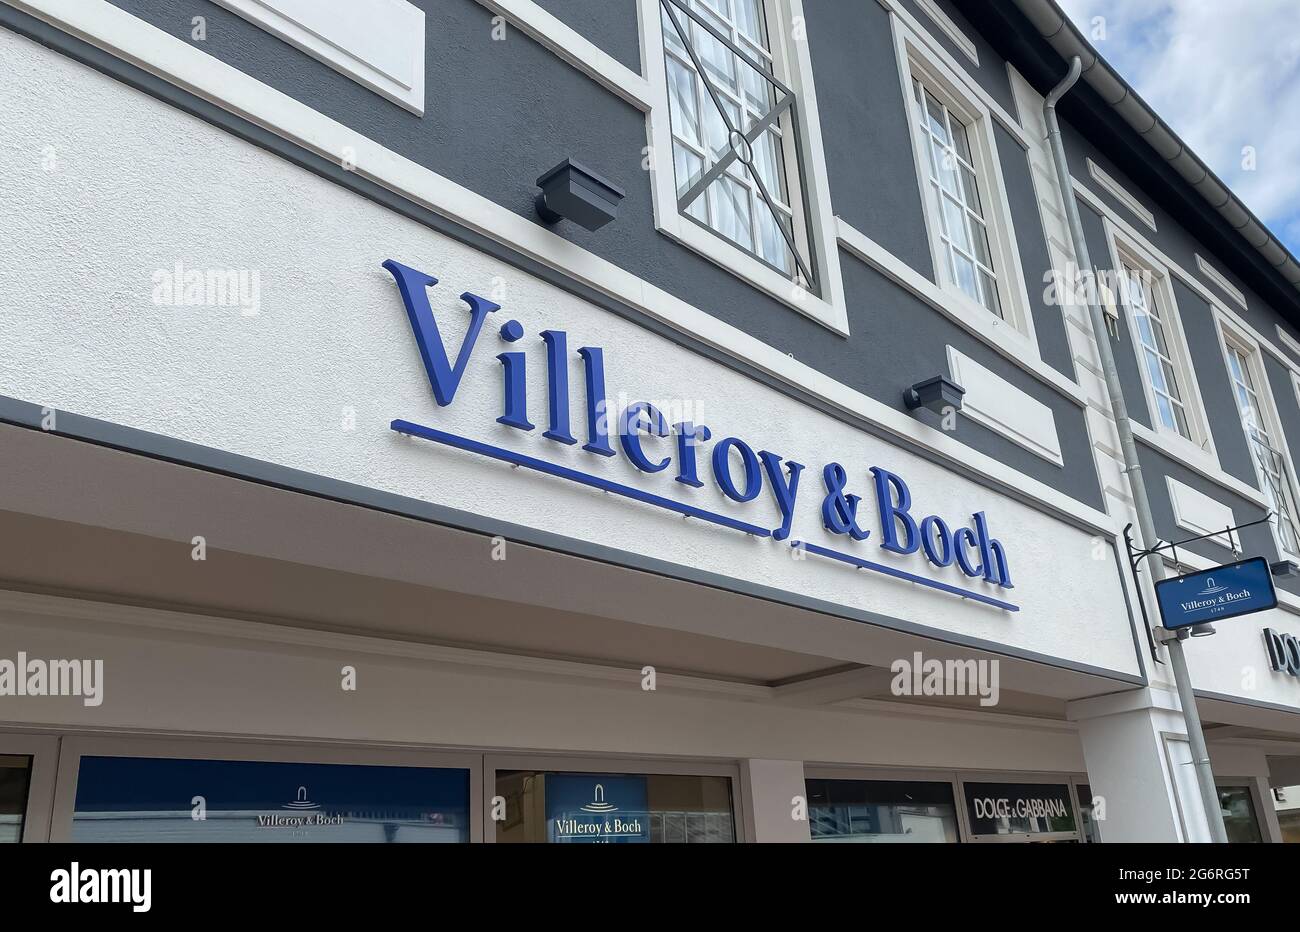 Roermond, Netherlands - July 1. 2021: View on store facade with logo lettering of villeroy and boch ceramics company Stock Photo